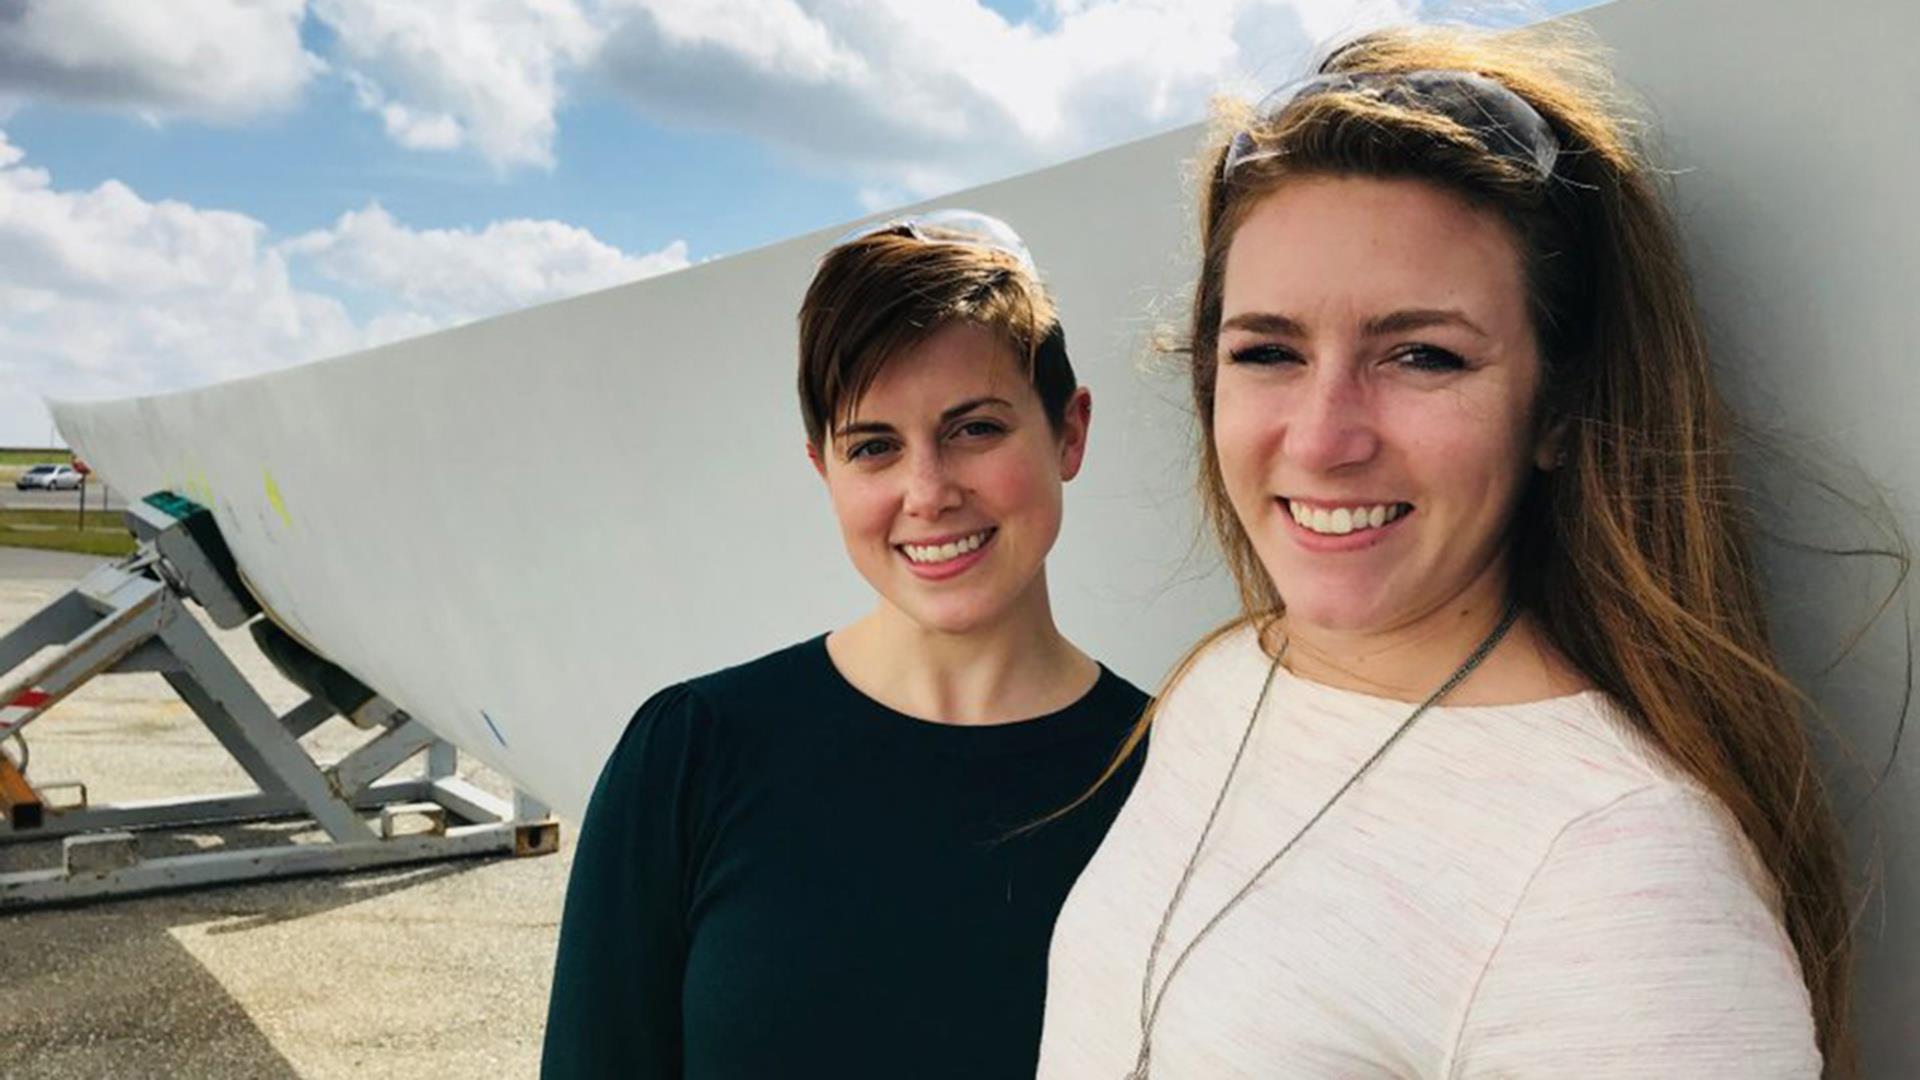 These women are helping build the wind turbine blades of the future.